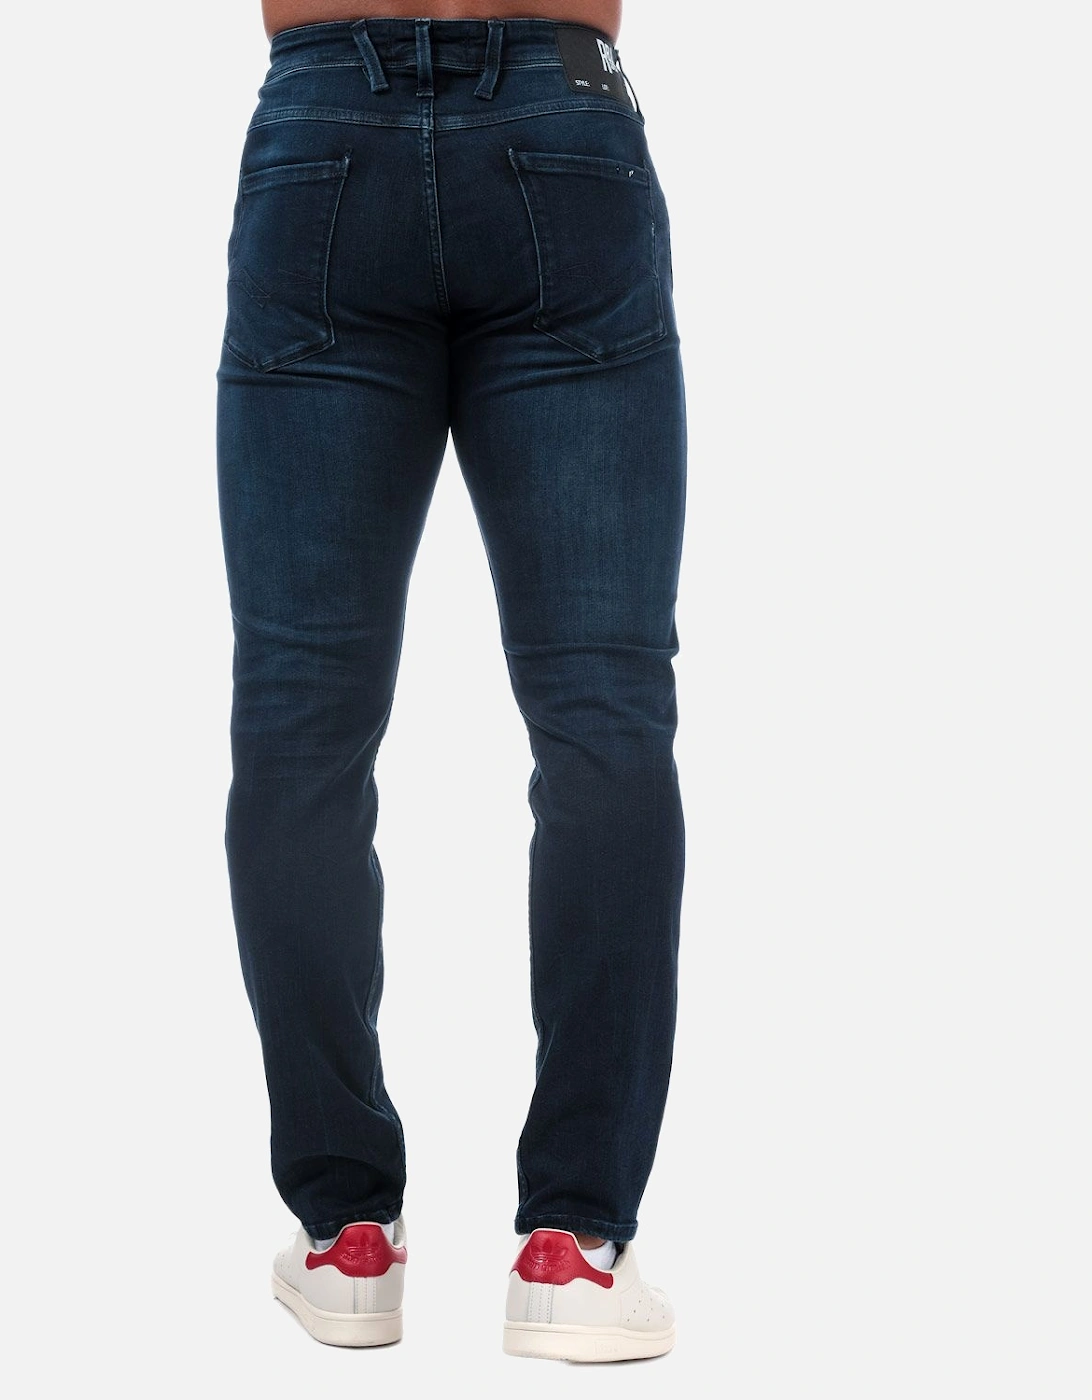 Mens Anbass Slim Fit Jeans